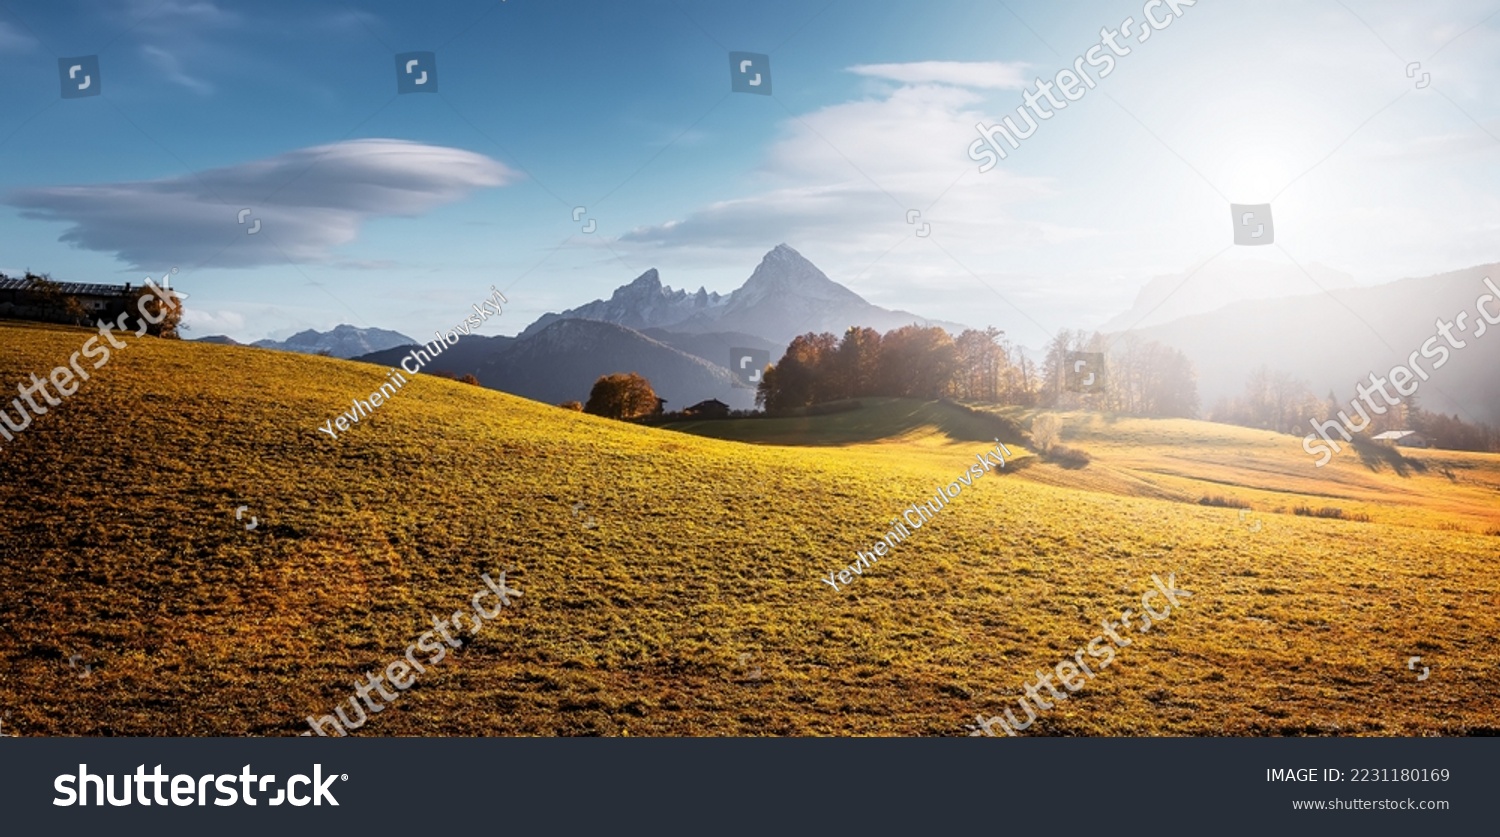 Wonderful nature landscape. Incredible autumn scenery. View on Alpine highlands with Watzmann mount, grasse hils and perfect sky. Famous National Park Berchtesgadener Land, Bavaria, Germany #2231180169